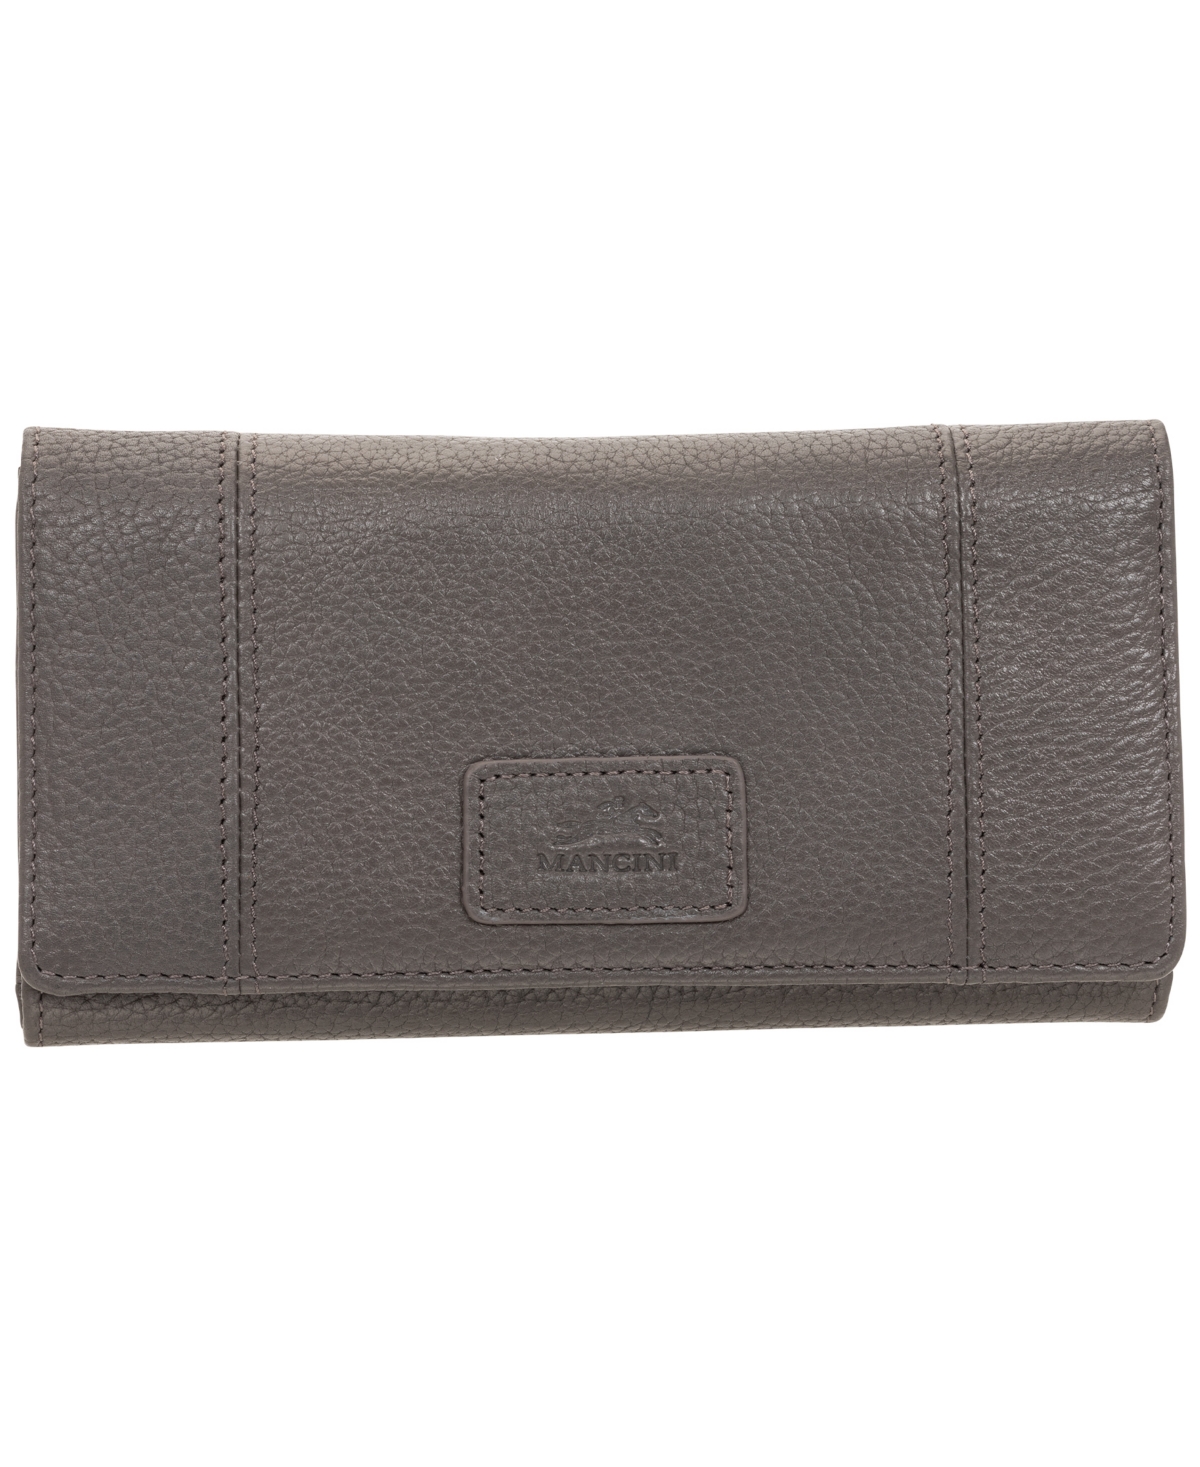 Mancini Women's Pebbled Collection Rfid Secure Trifold Wing Wallet